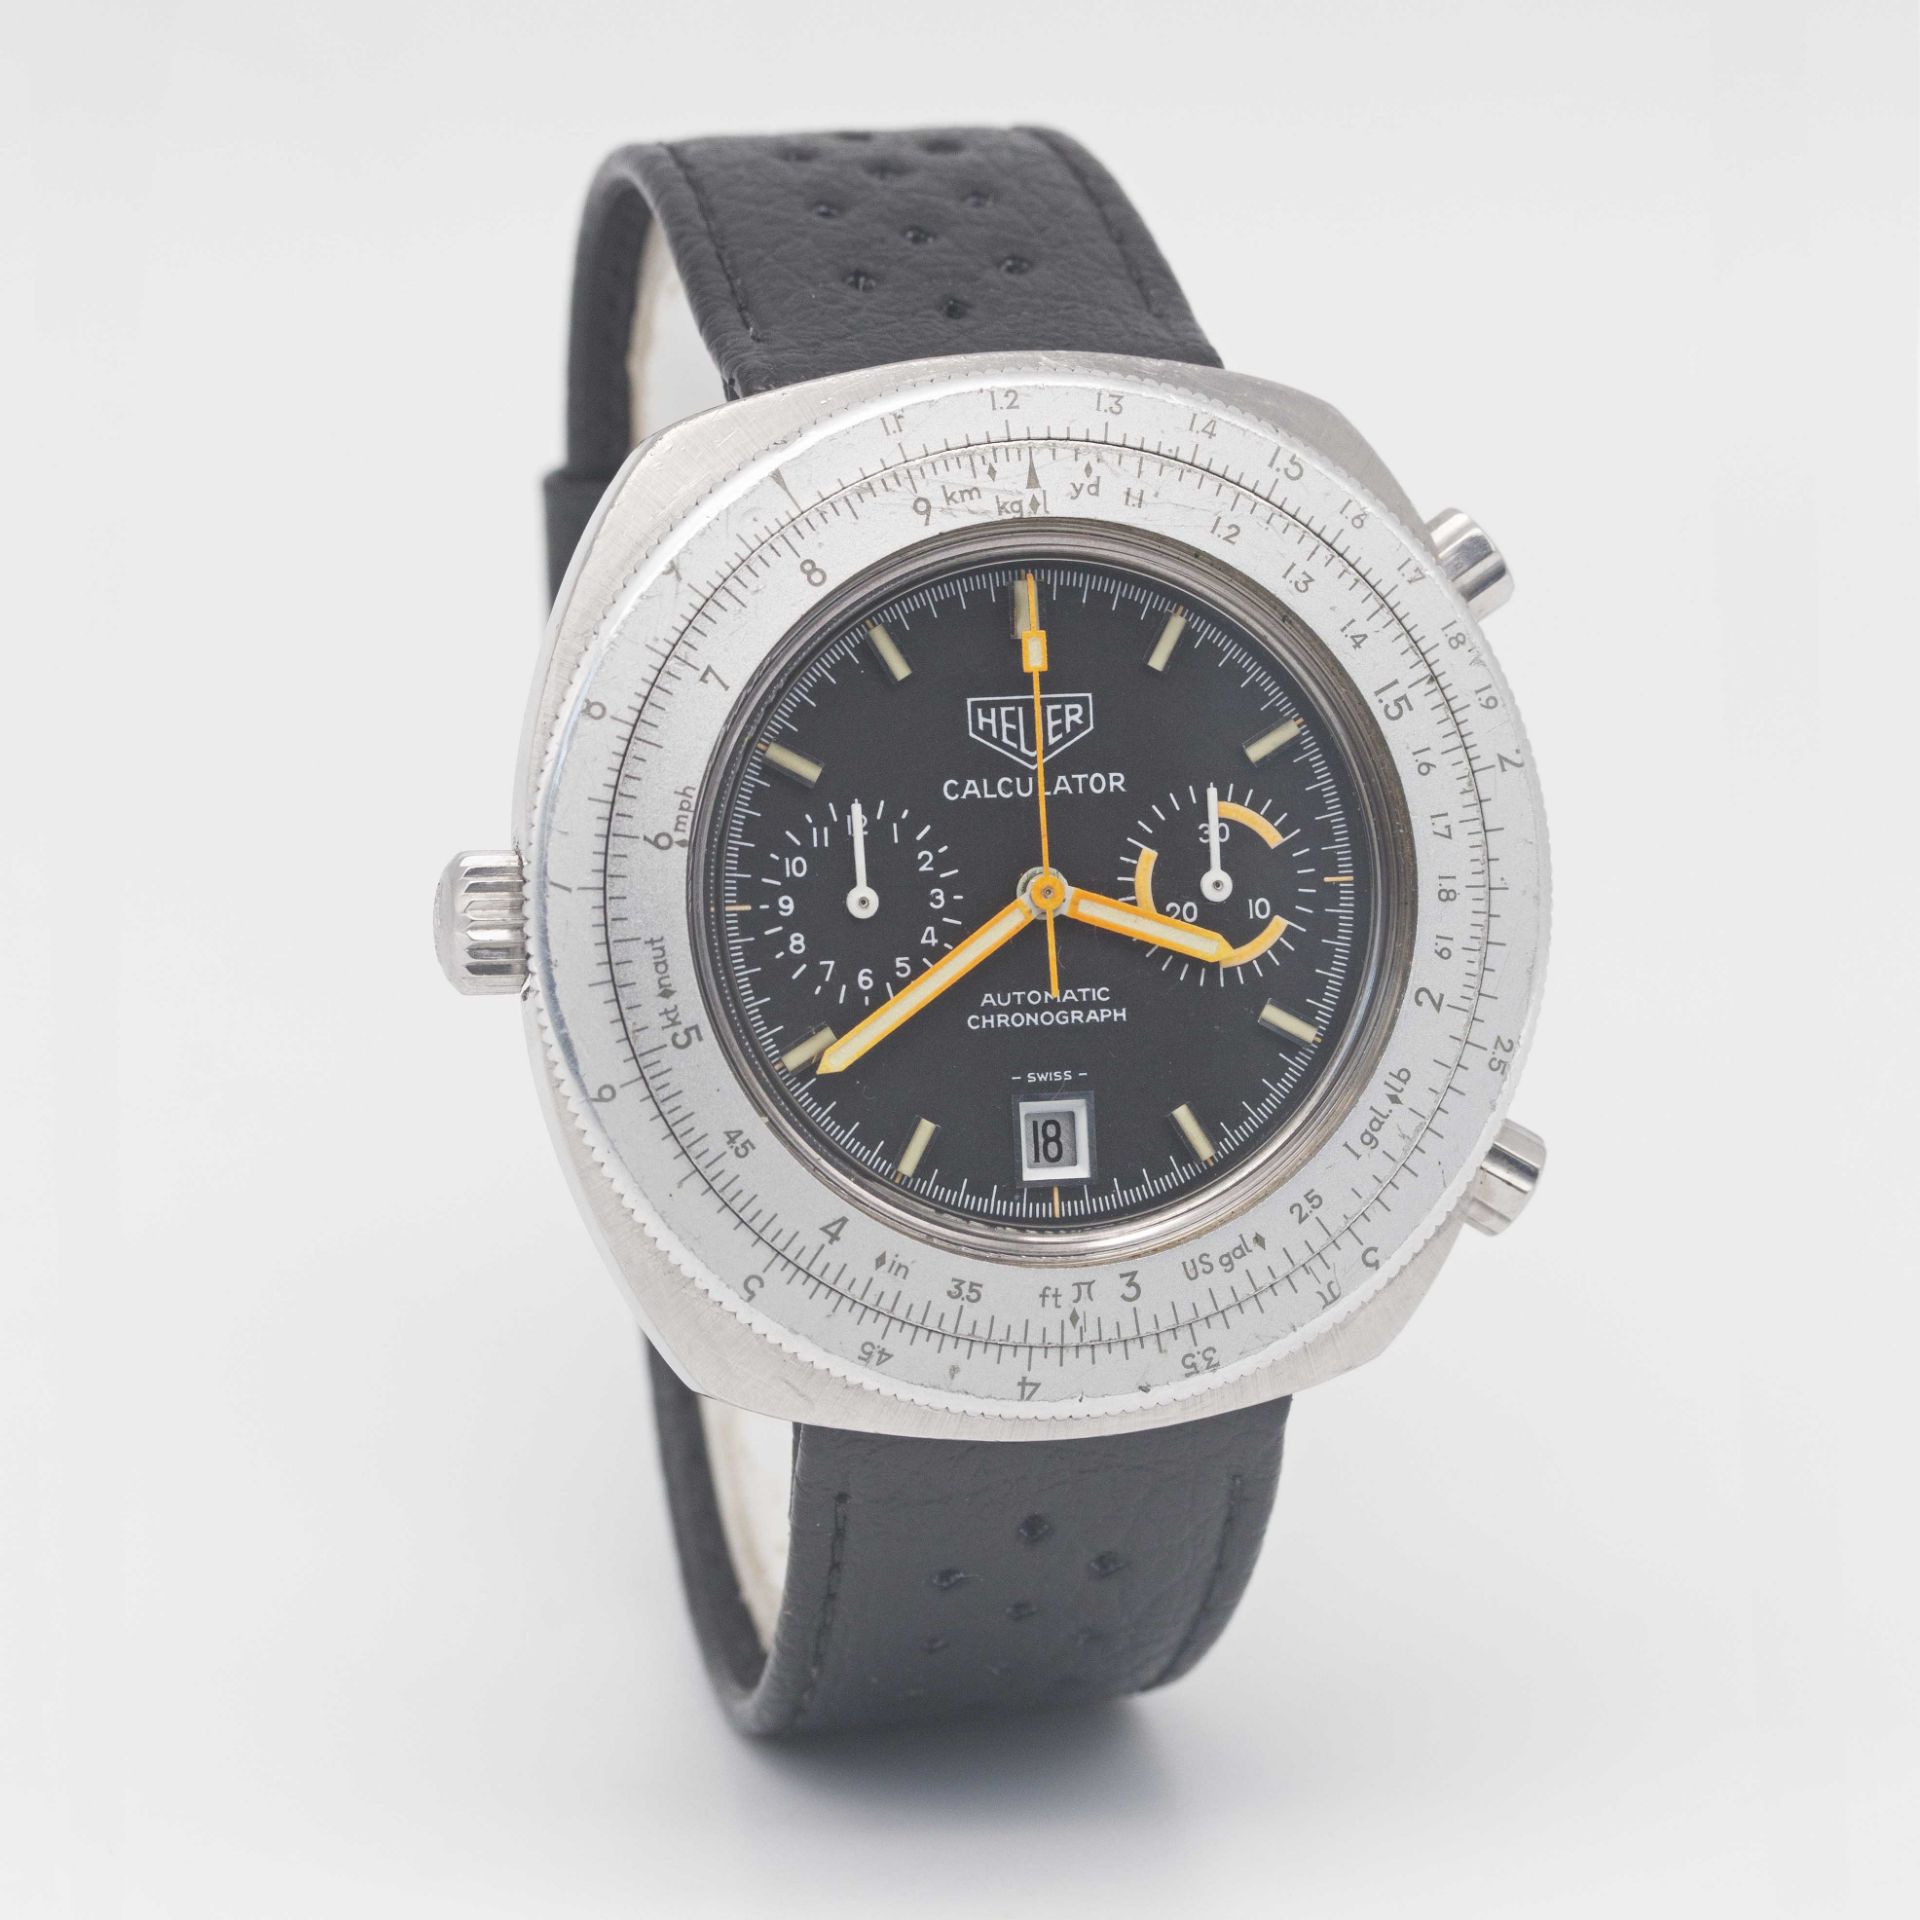 A GENTLEMAN'S STAINLESS STEEL HEUER CALCULATOR AUTOMATIC CHRONOGRAPH WRIST WATCH CIRCA 1970s, REF. - Image 5 of 8